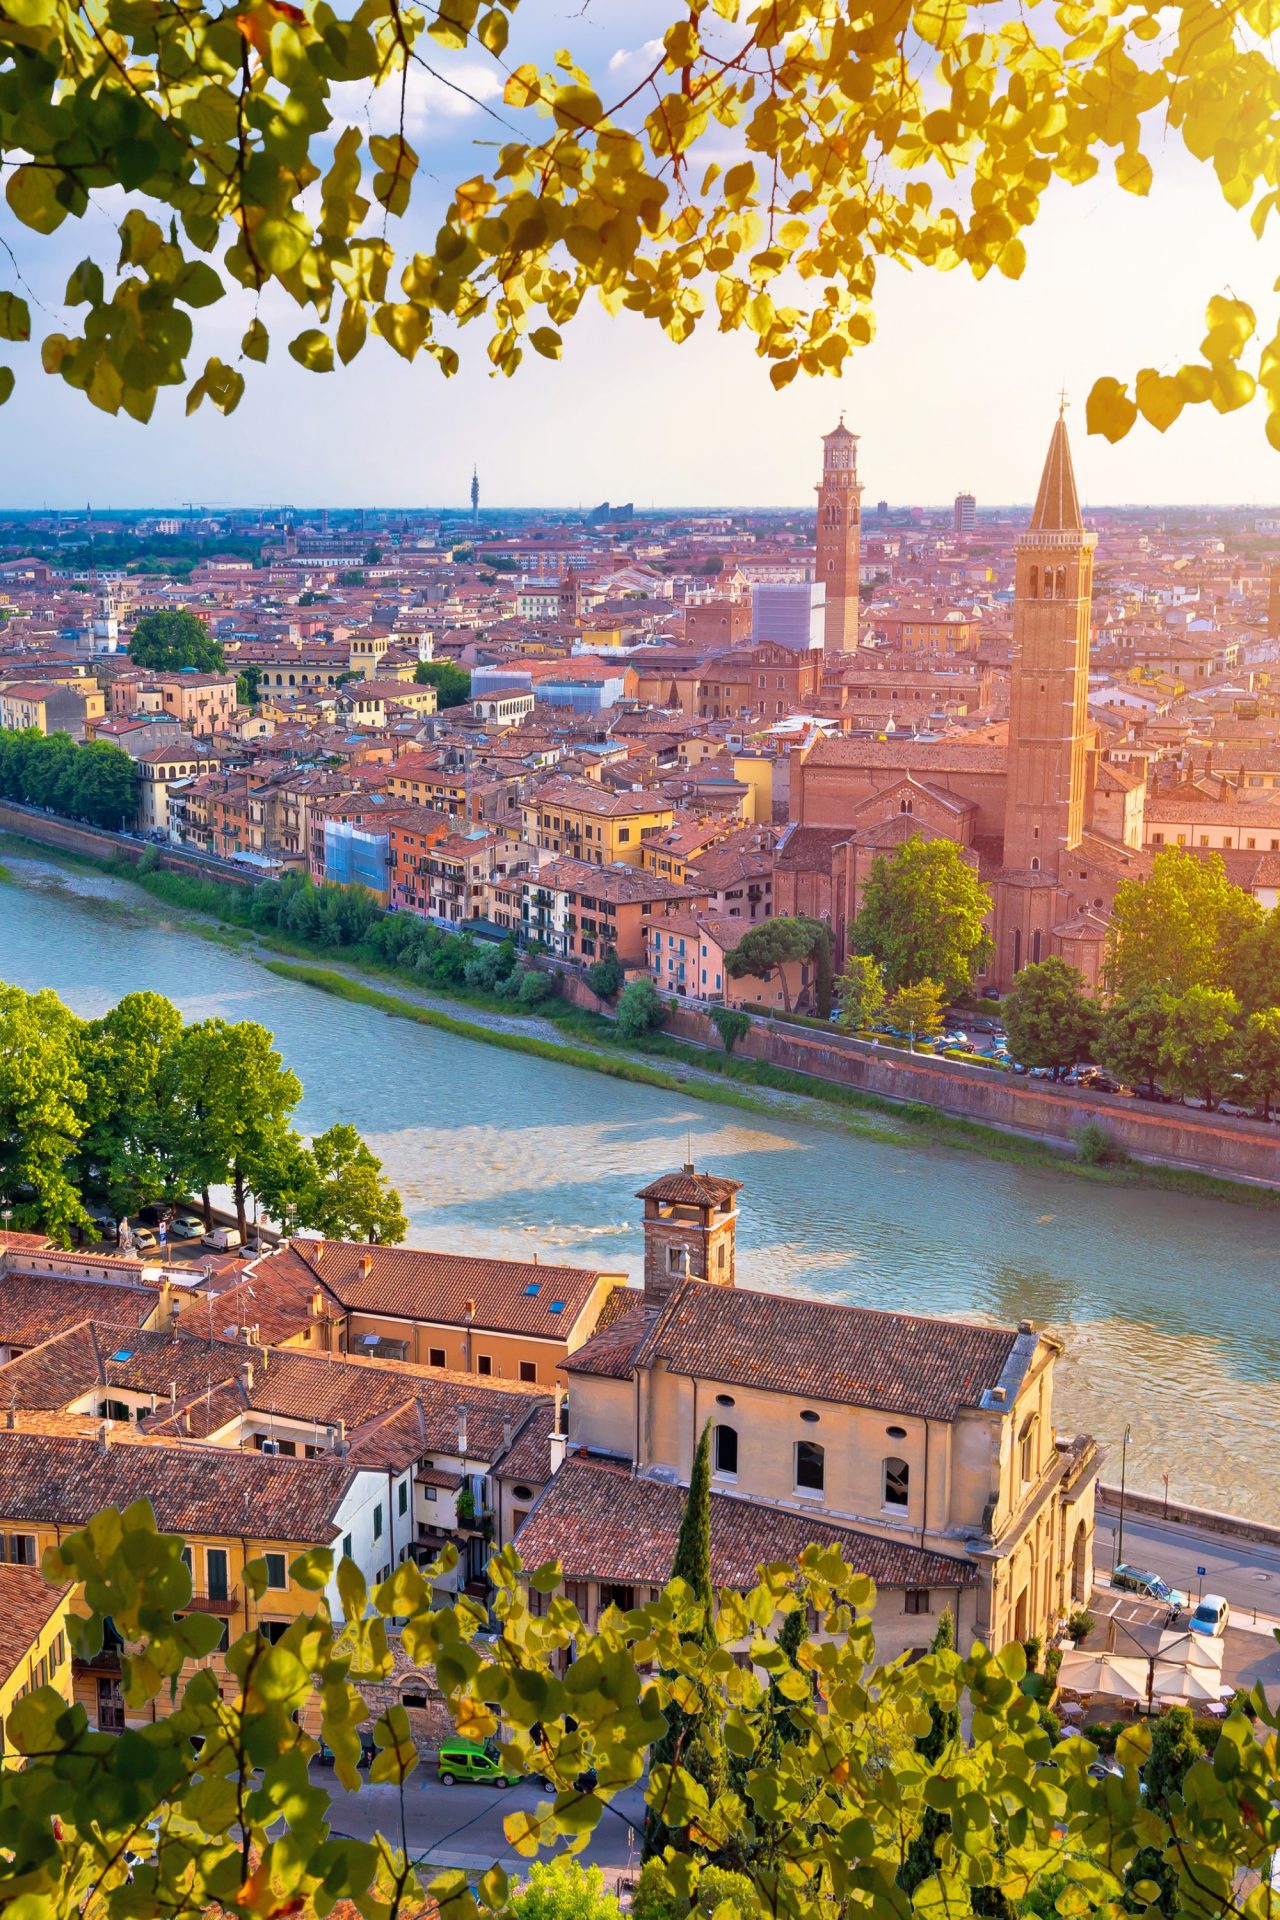 Picturesque Verona is located on the Adige River